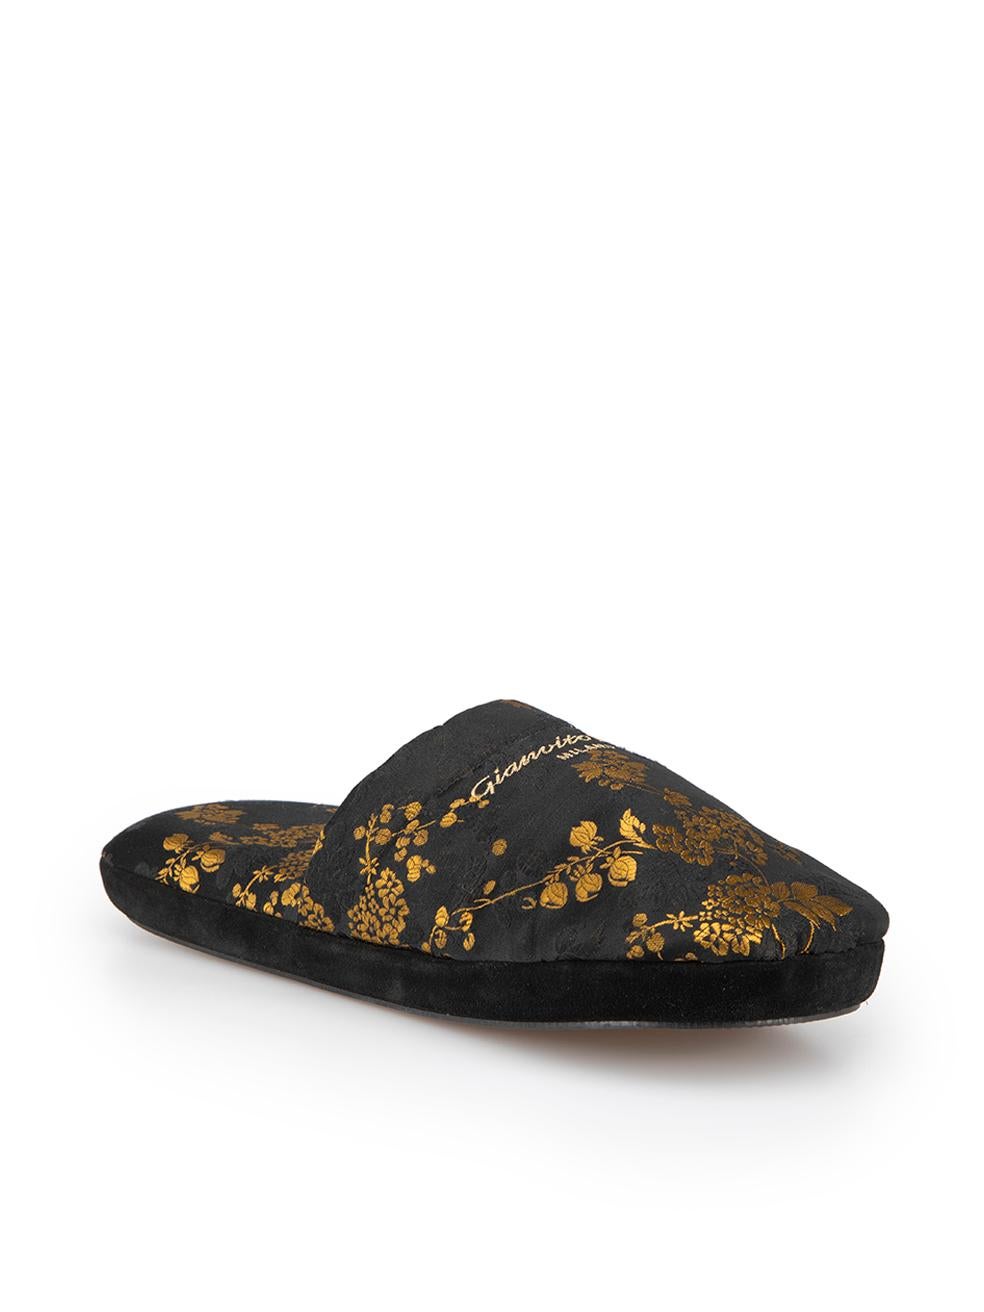 CONDITION is Very good. Hardly any visible wear to slides is evident on this used Gianvito Rossi designer resale item. This item includes the original dustbag.
 
 Details
  Black
 Cloth textile
 Loungewear slides
 Gold floral pattern
 Round toe
